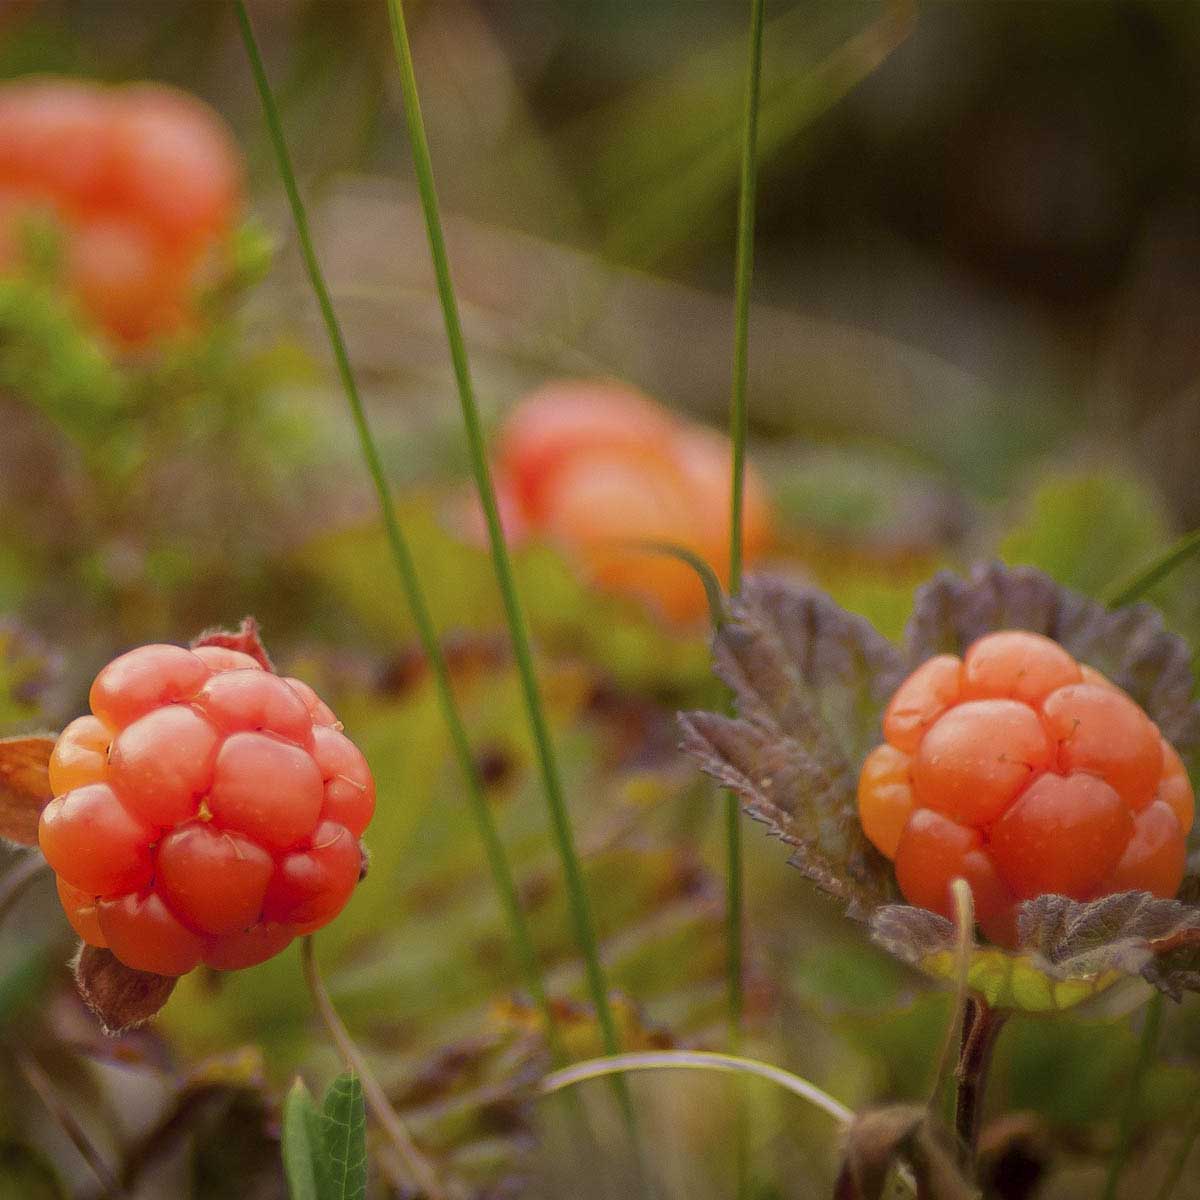 Two ripe orange cloudberries grow on small, low to the ground plants.